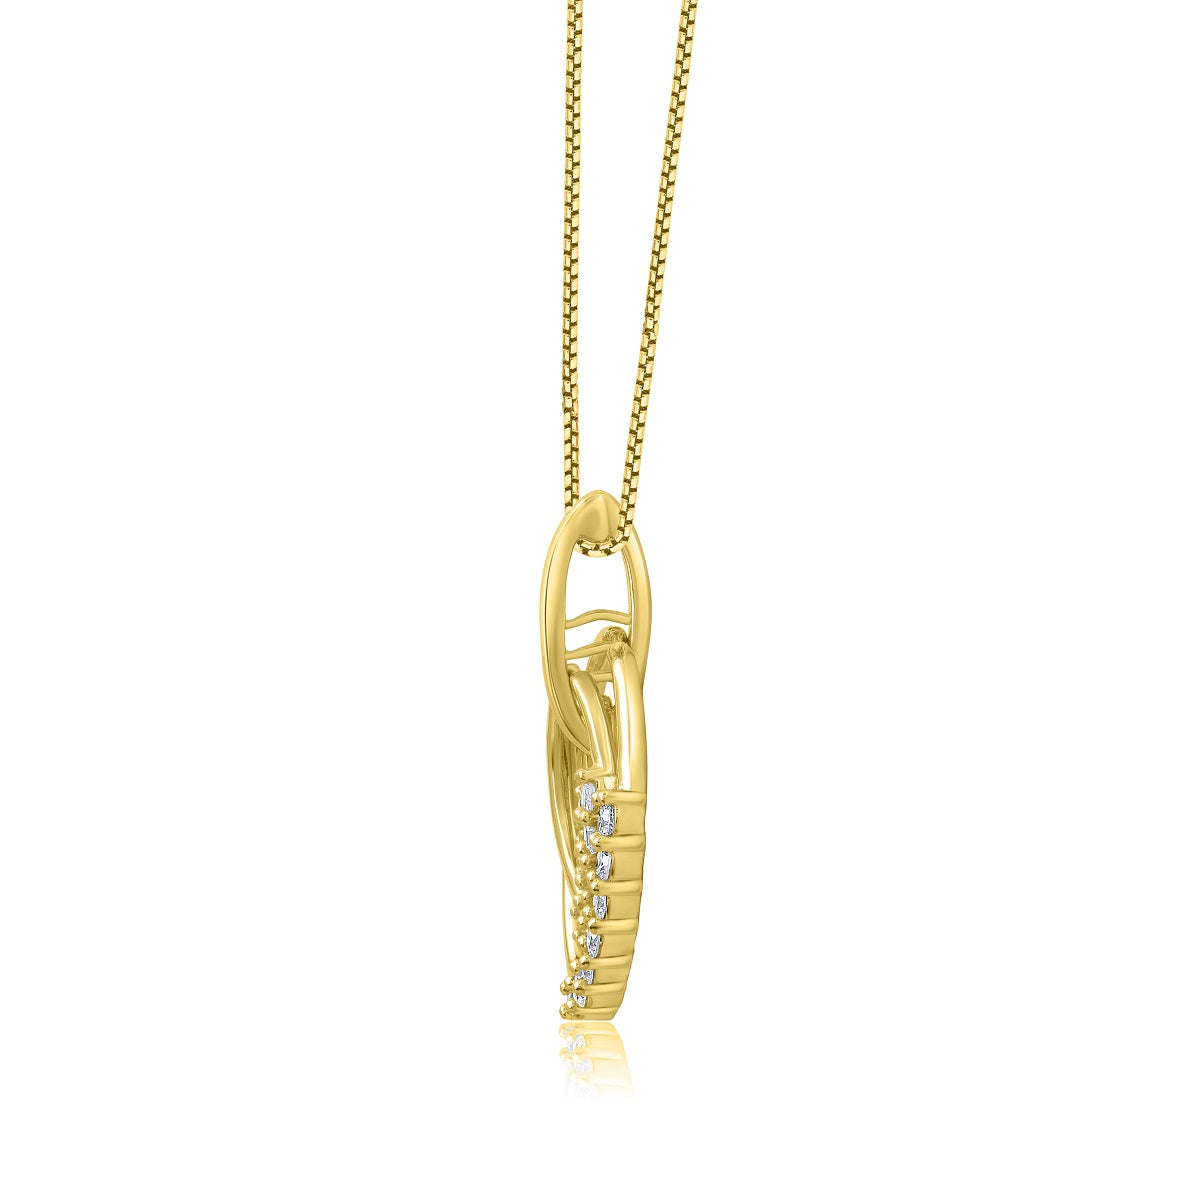 Open Oval Circle Natural Diamond Pendant Necklace in 10K Gold